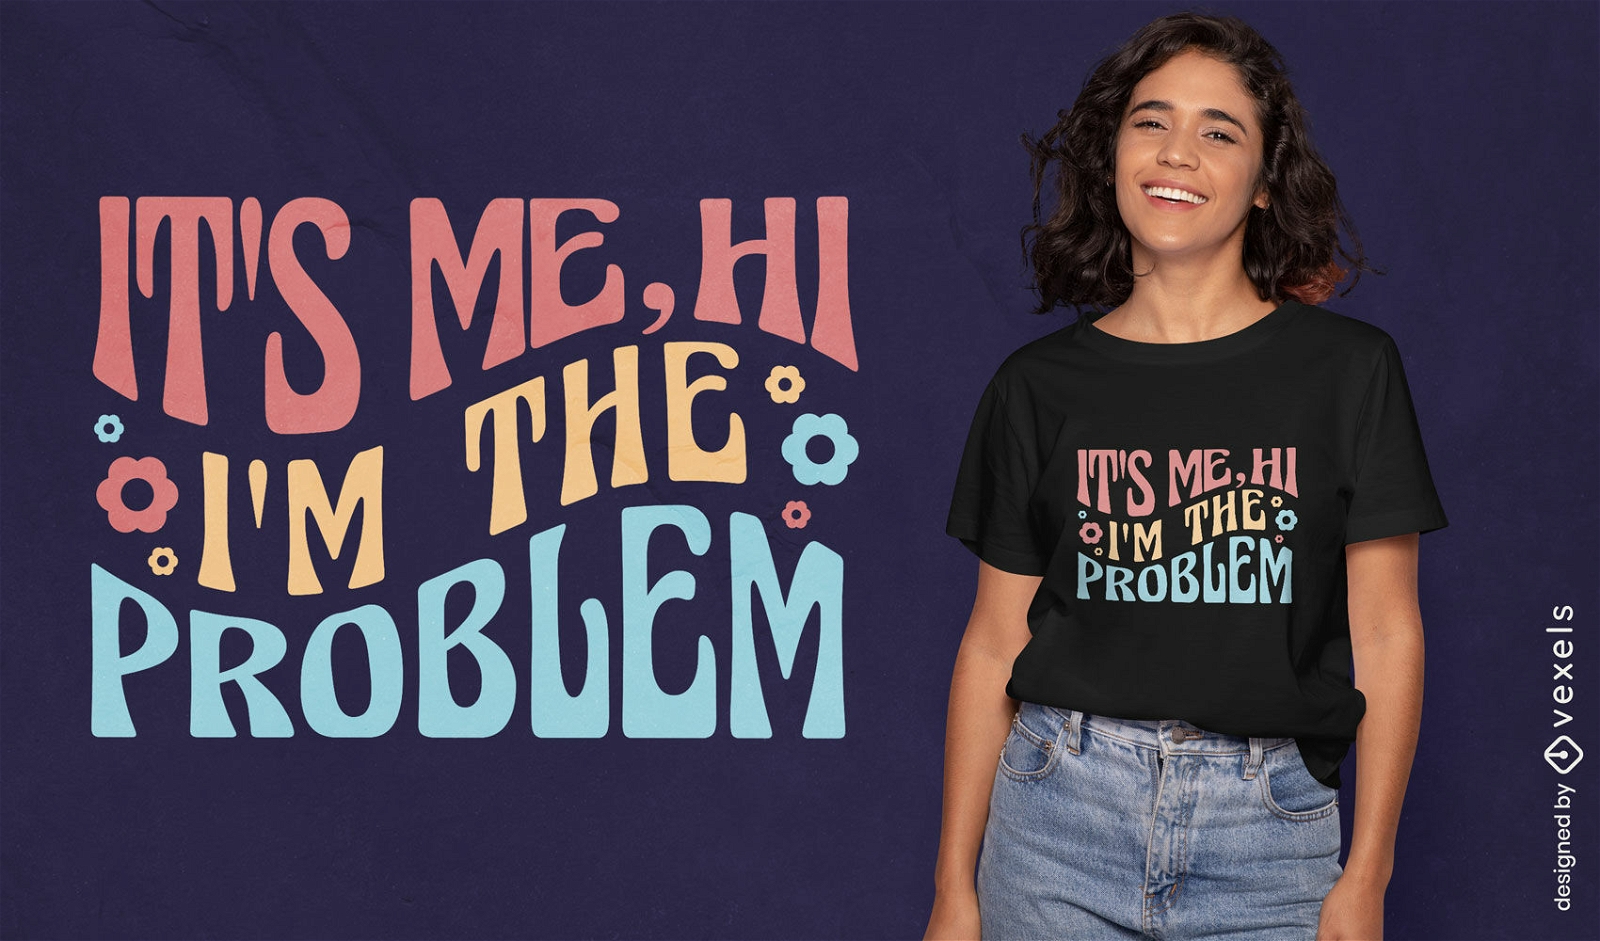 Funny groovy quote t-shirt design